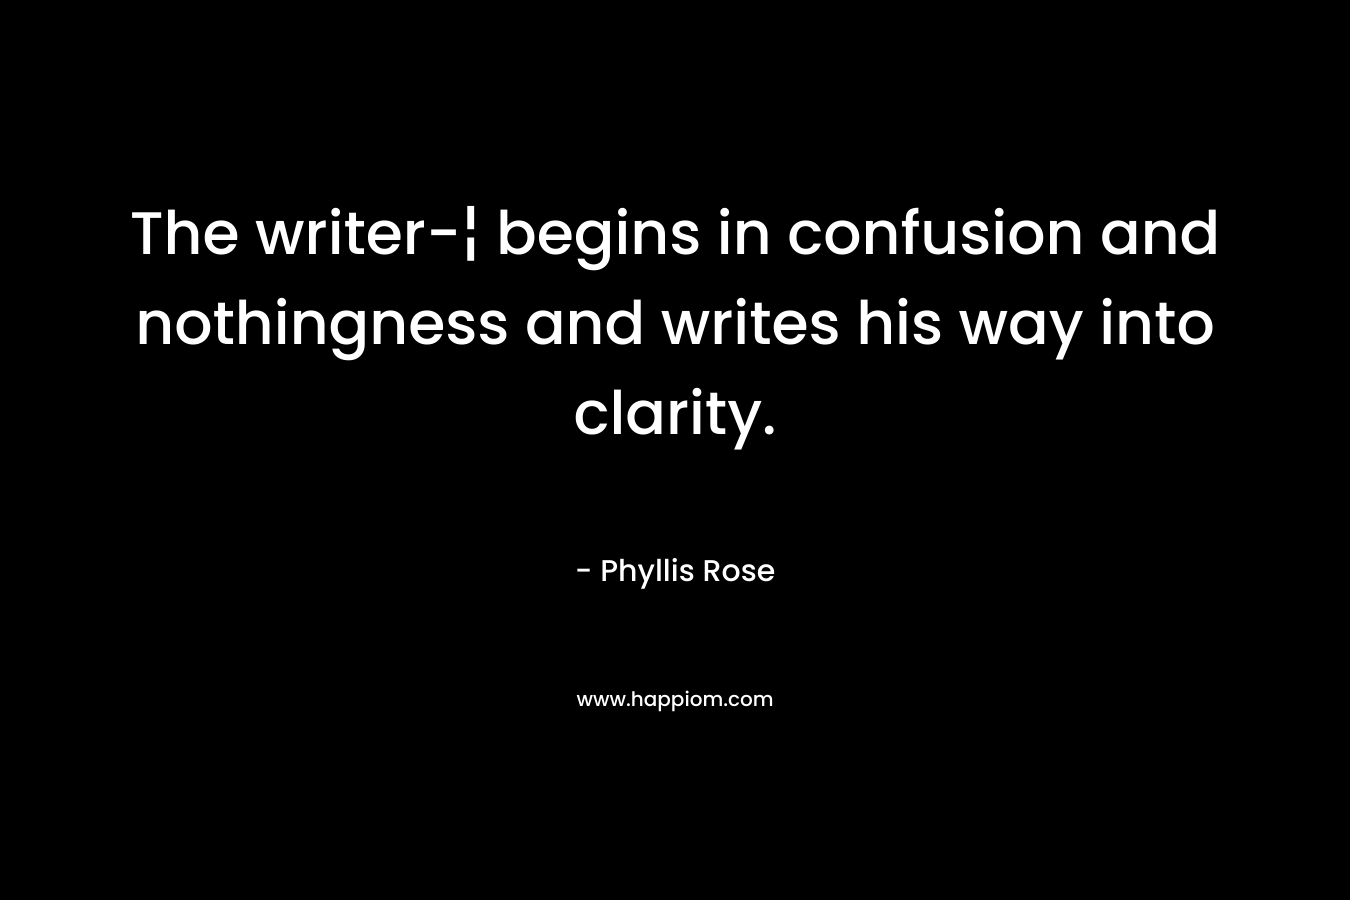 The writer-¦ begins in confusion and nothingness and writes his way into clarity. – Phyllis Rose